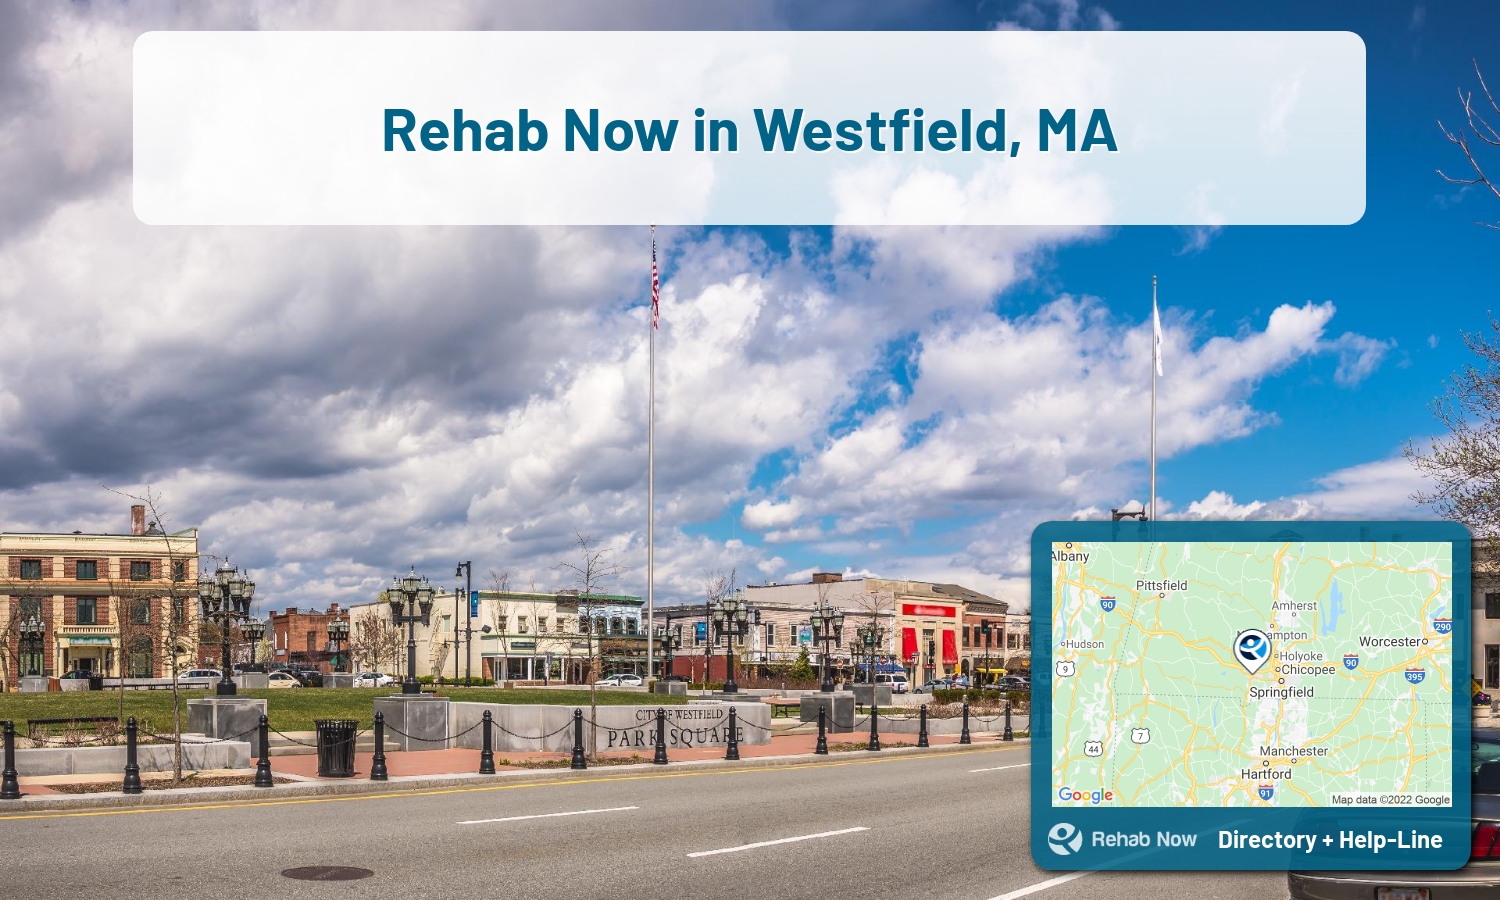 Westfield, MA Treatment Centers. Find drug rehab in Westfield, Massachusetts, or detox and treatment programs. Get the right help now!